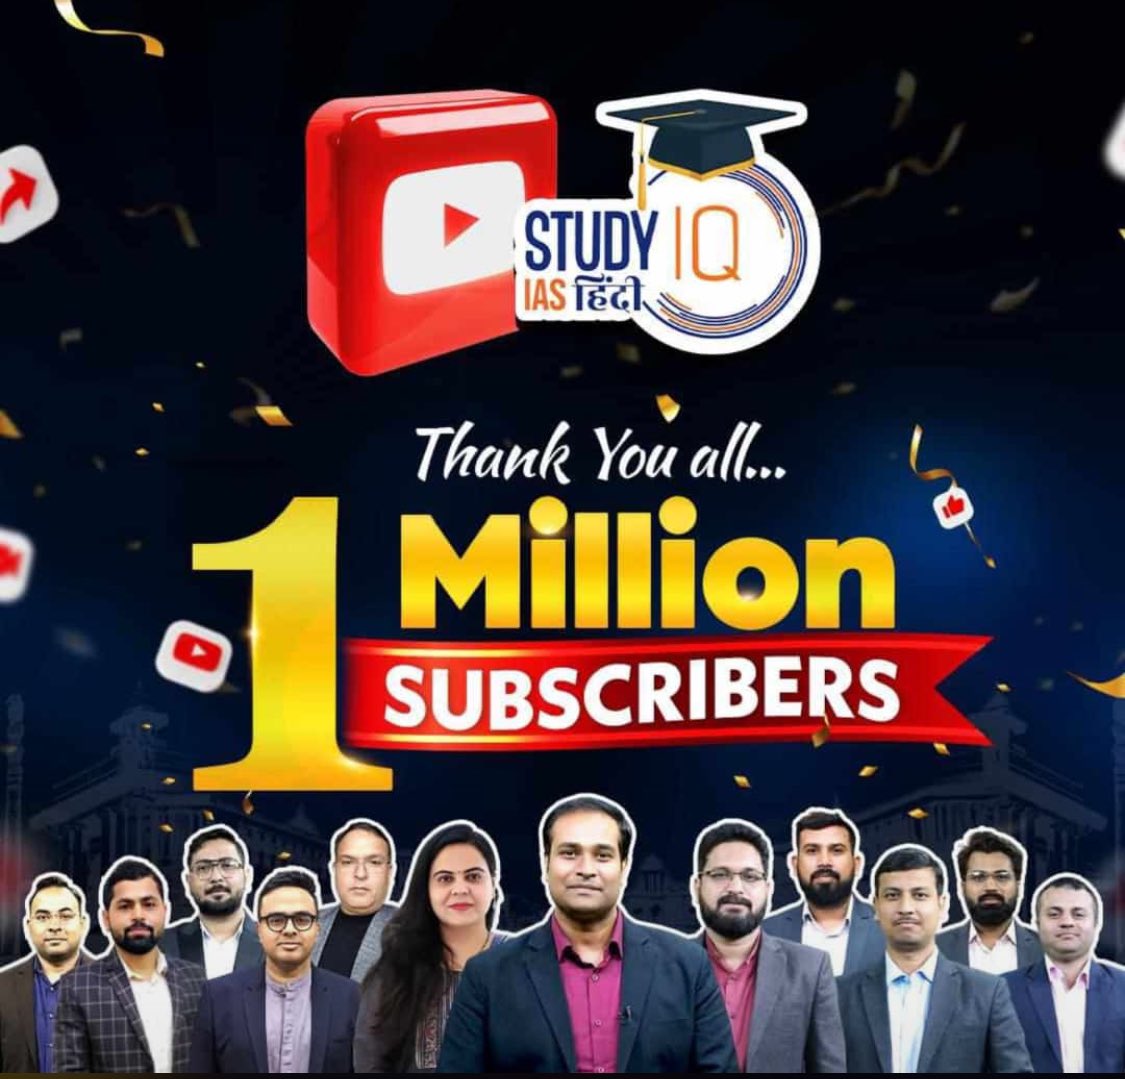 Study IQ’s dedicated Pure Hindi channel reaches one million subscribers. Thanks a lot everyon ⛄️🌹🙏